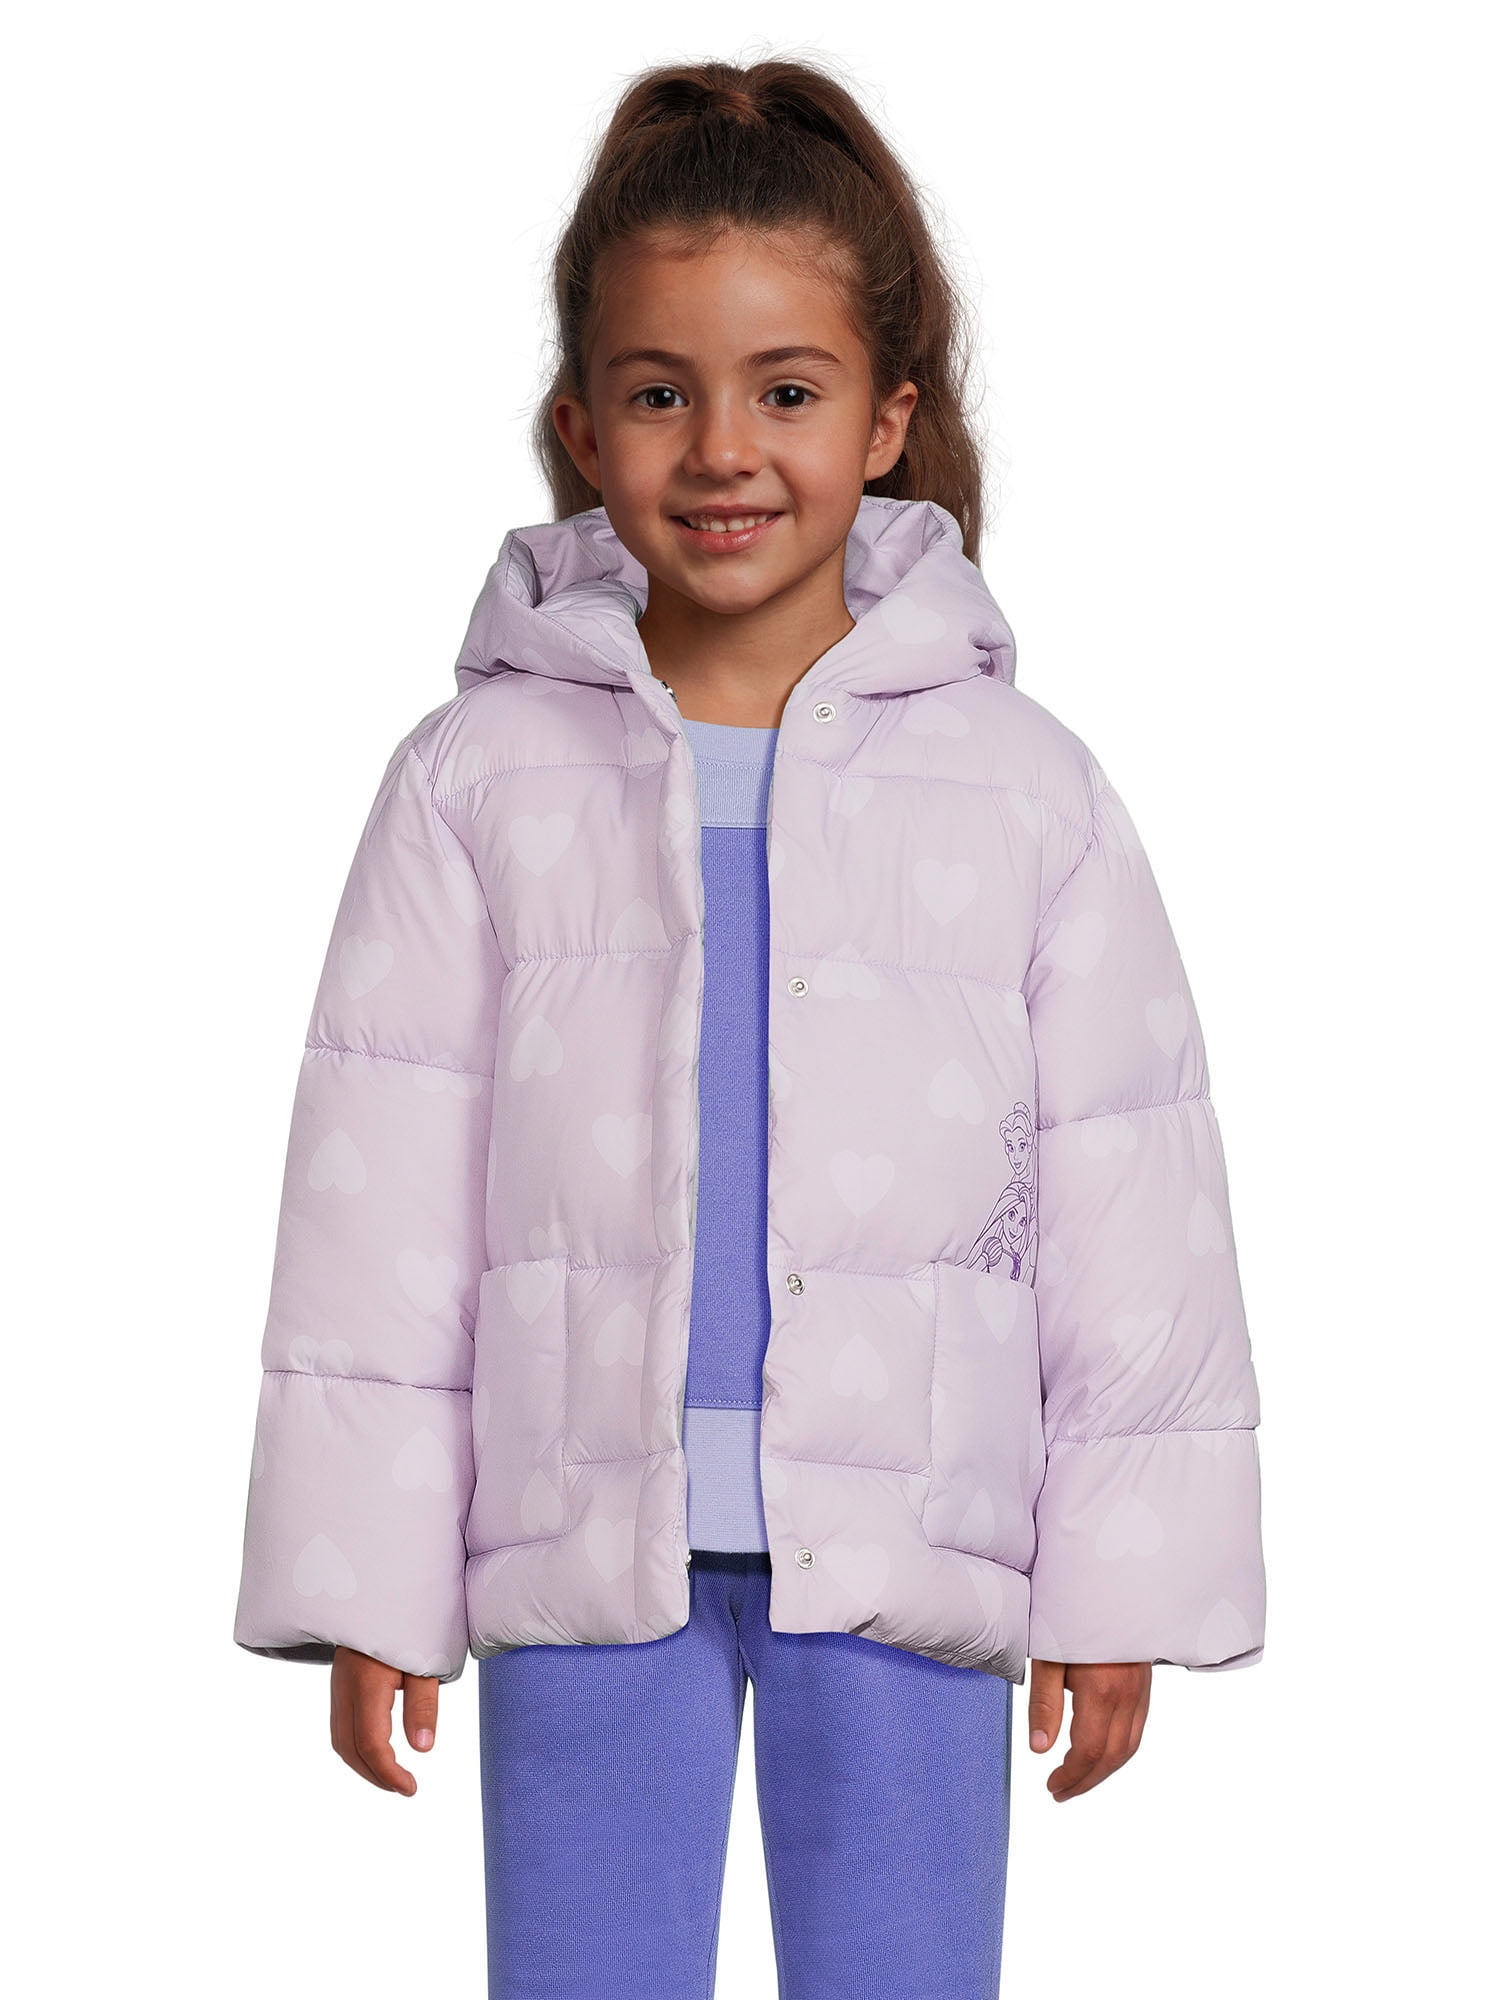 Disney Princess Girls Puffer Coat with Pockets and Hood, Sizes 4-12 ...